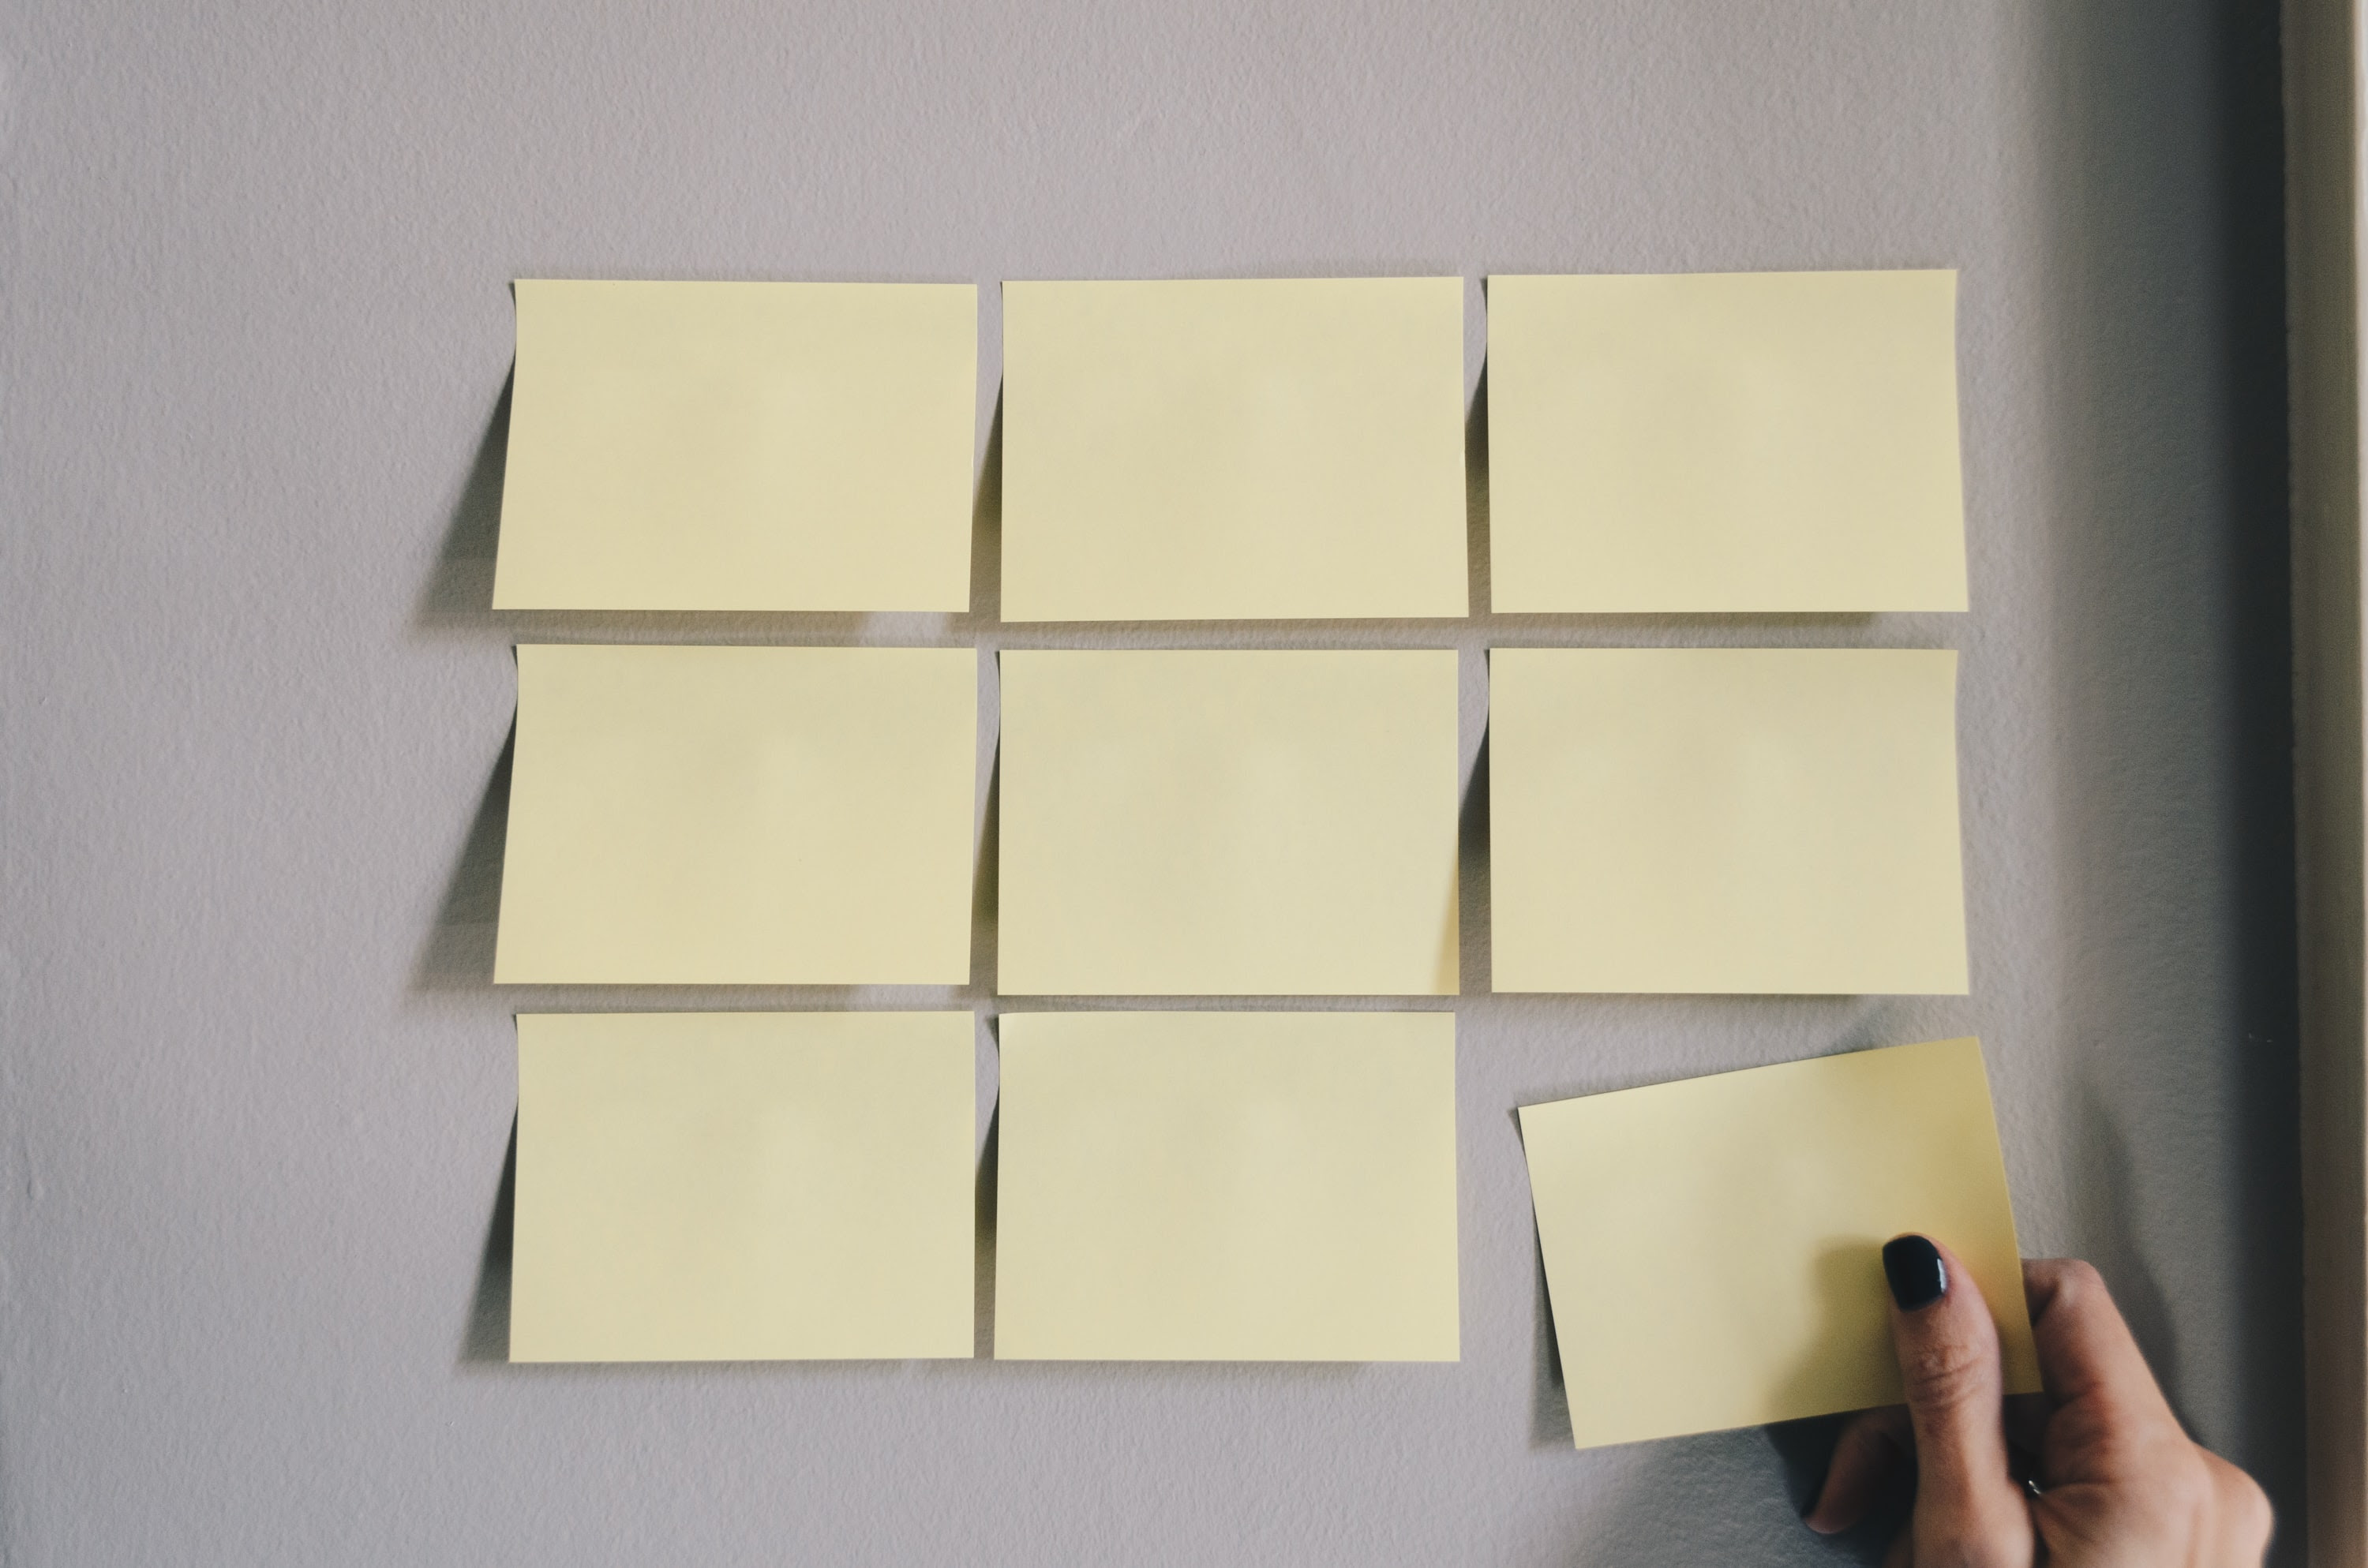 Photo of a series of yellow post it notes on a white wall.